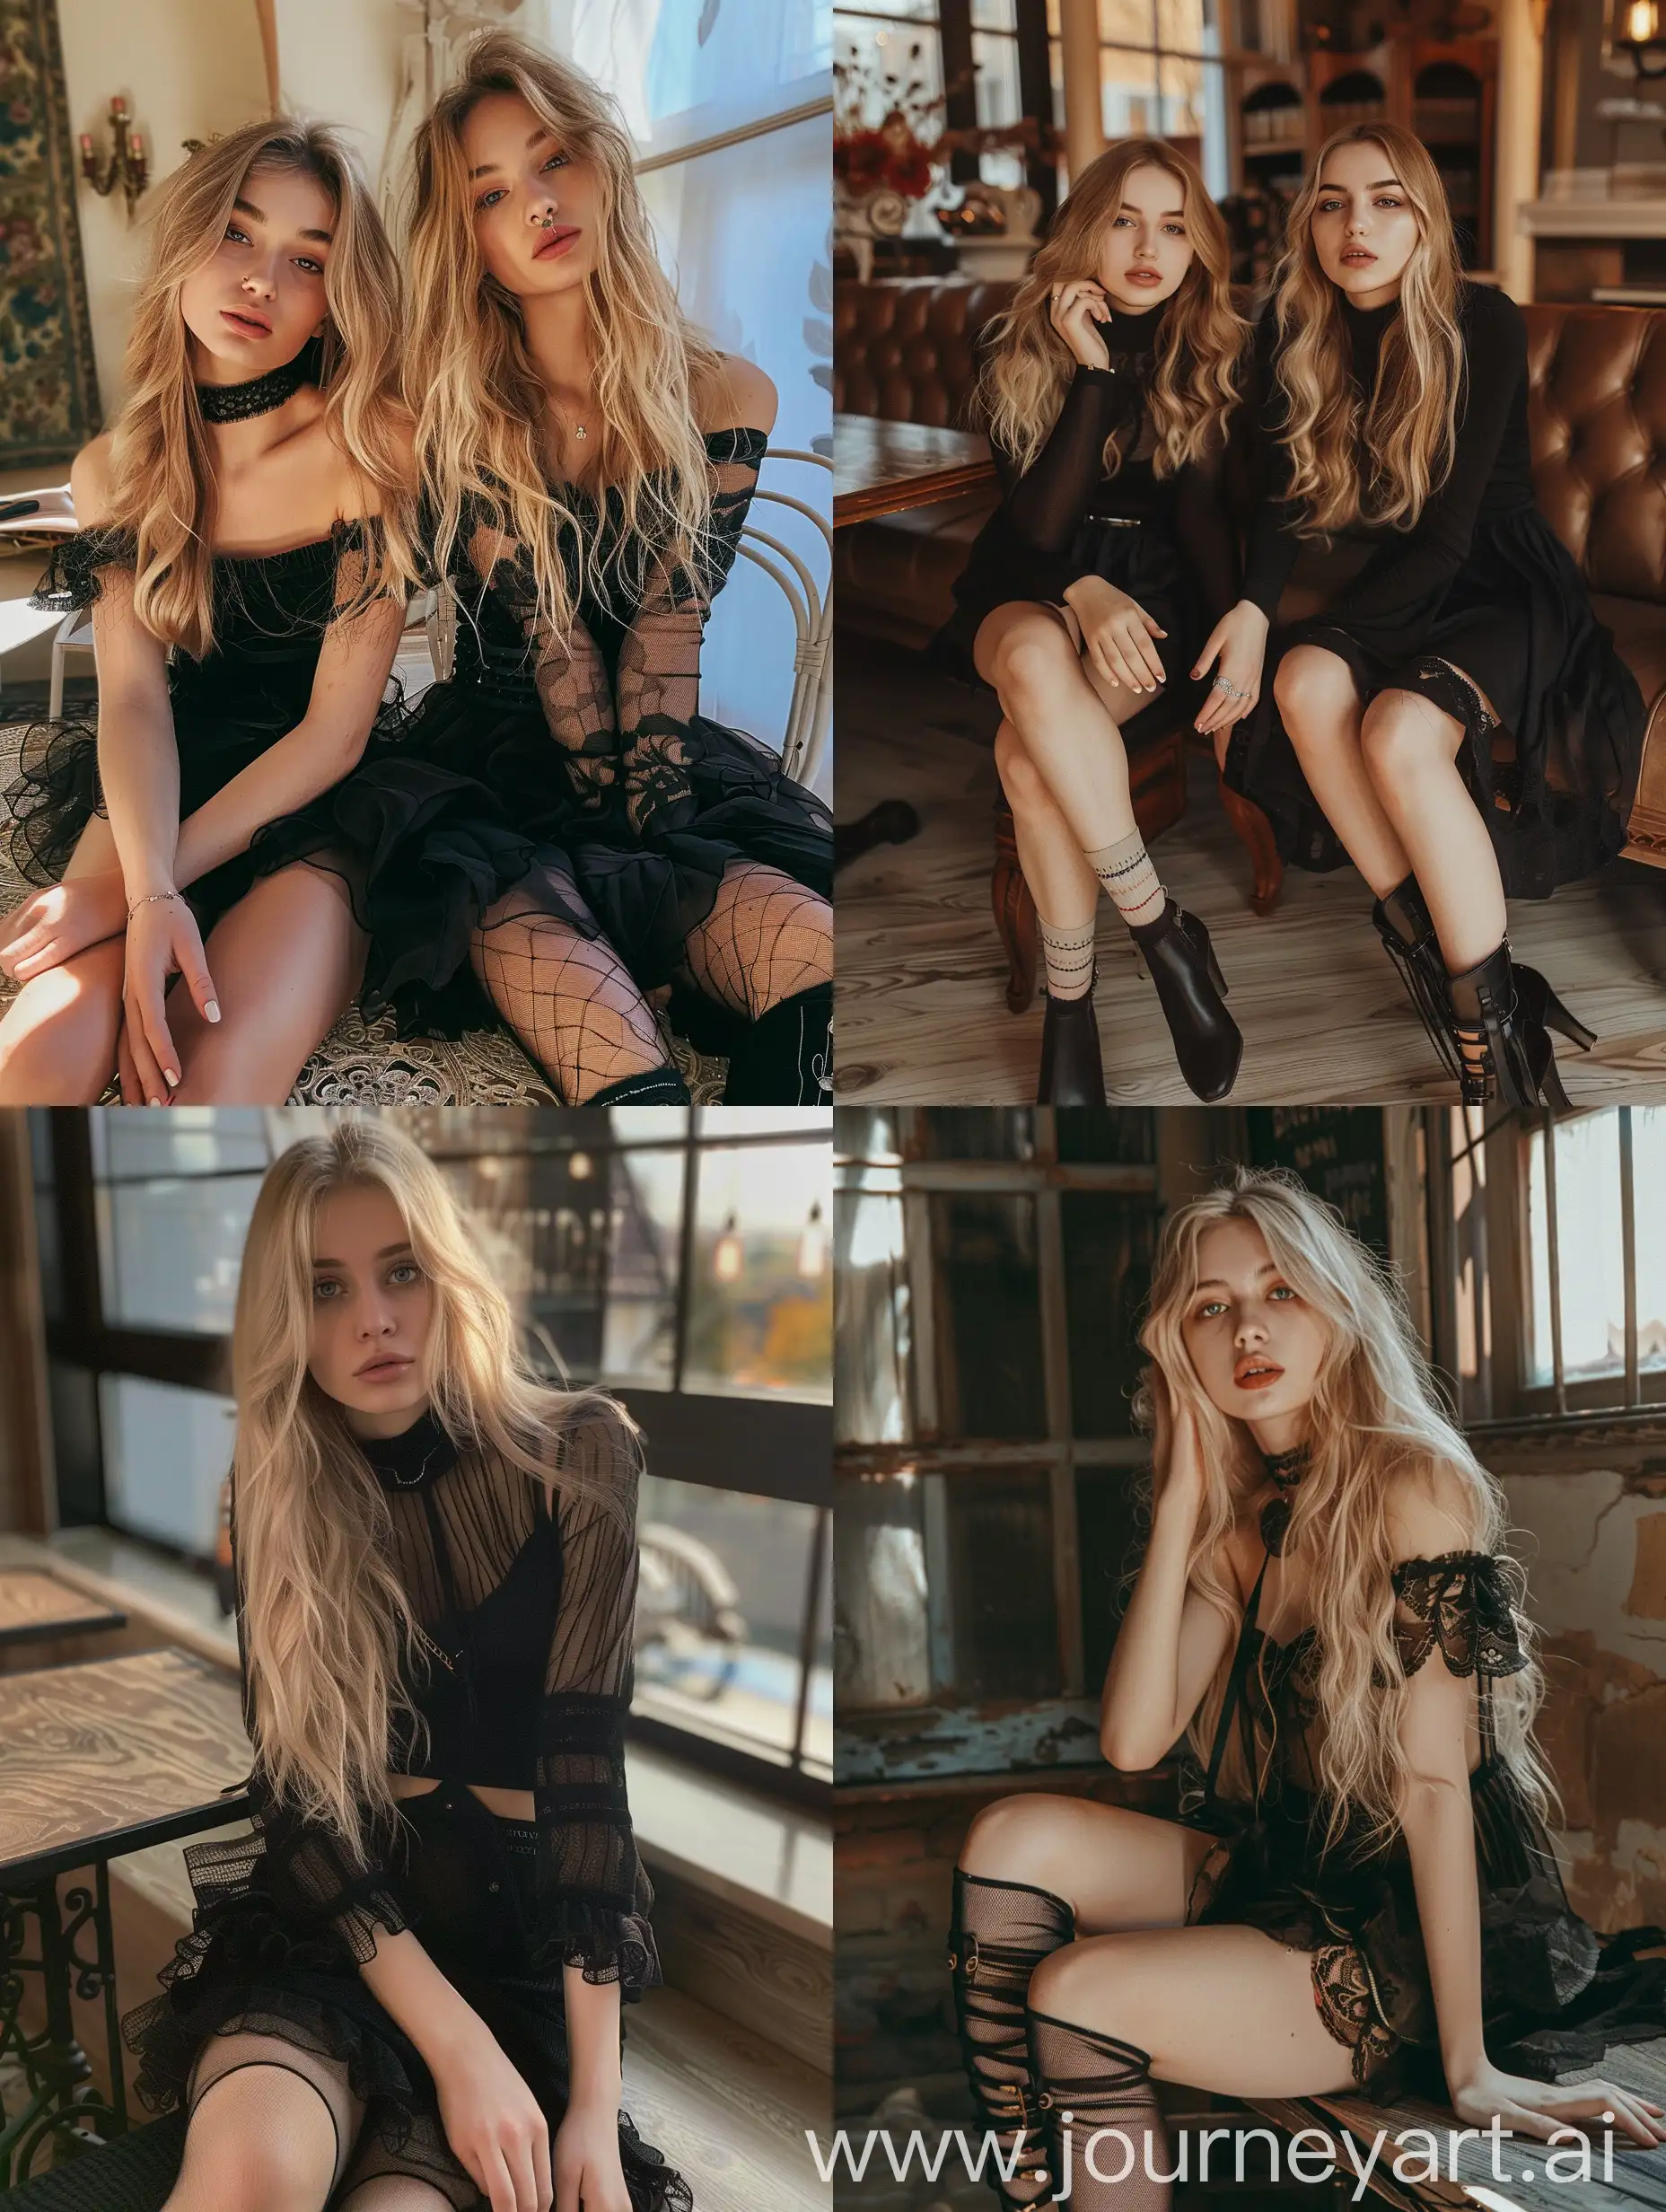 2 Ukrainians girls, long blond hair , 22 years old, influencer, beauty , black dress ,   , makeup, floor view, sitting on table , socks and boots, no effect, selfie , iphone selfie, no filters , iphone photo natural